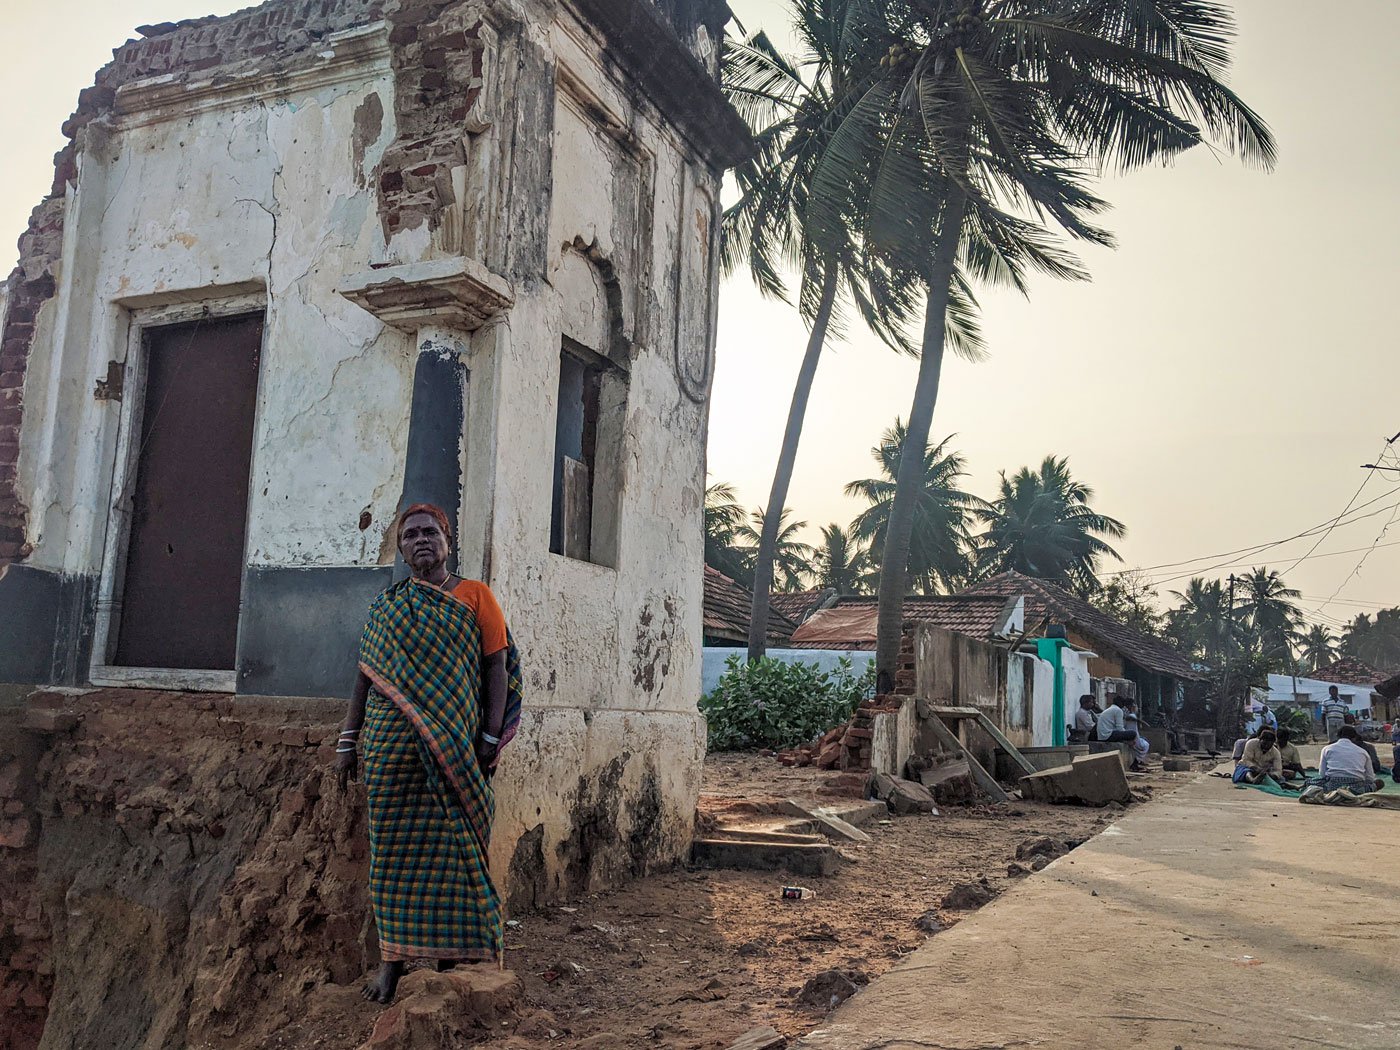 T. Maramma and the remains of her large home in Uppada, in January 2020. Her joint family lived there until the early years of this century